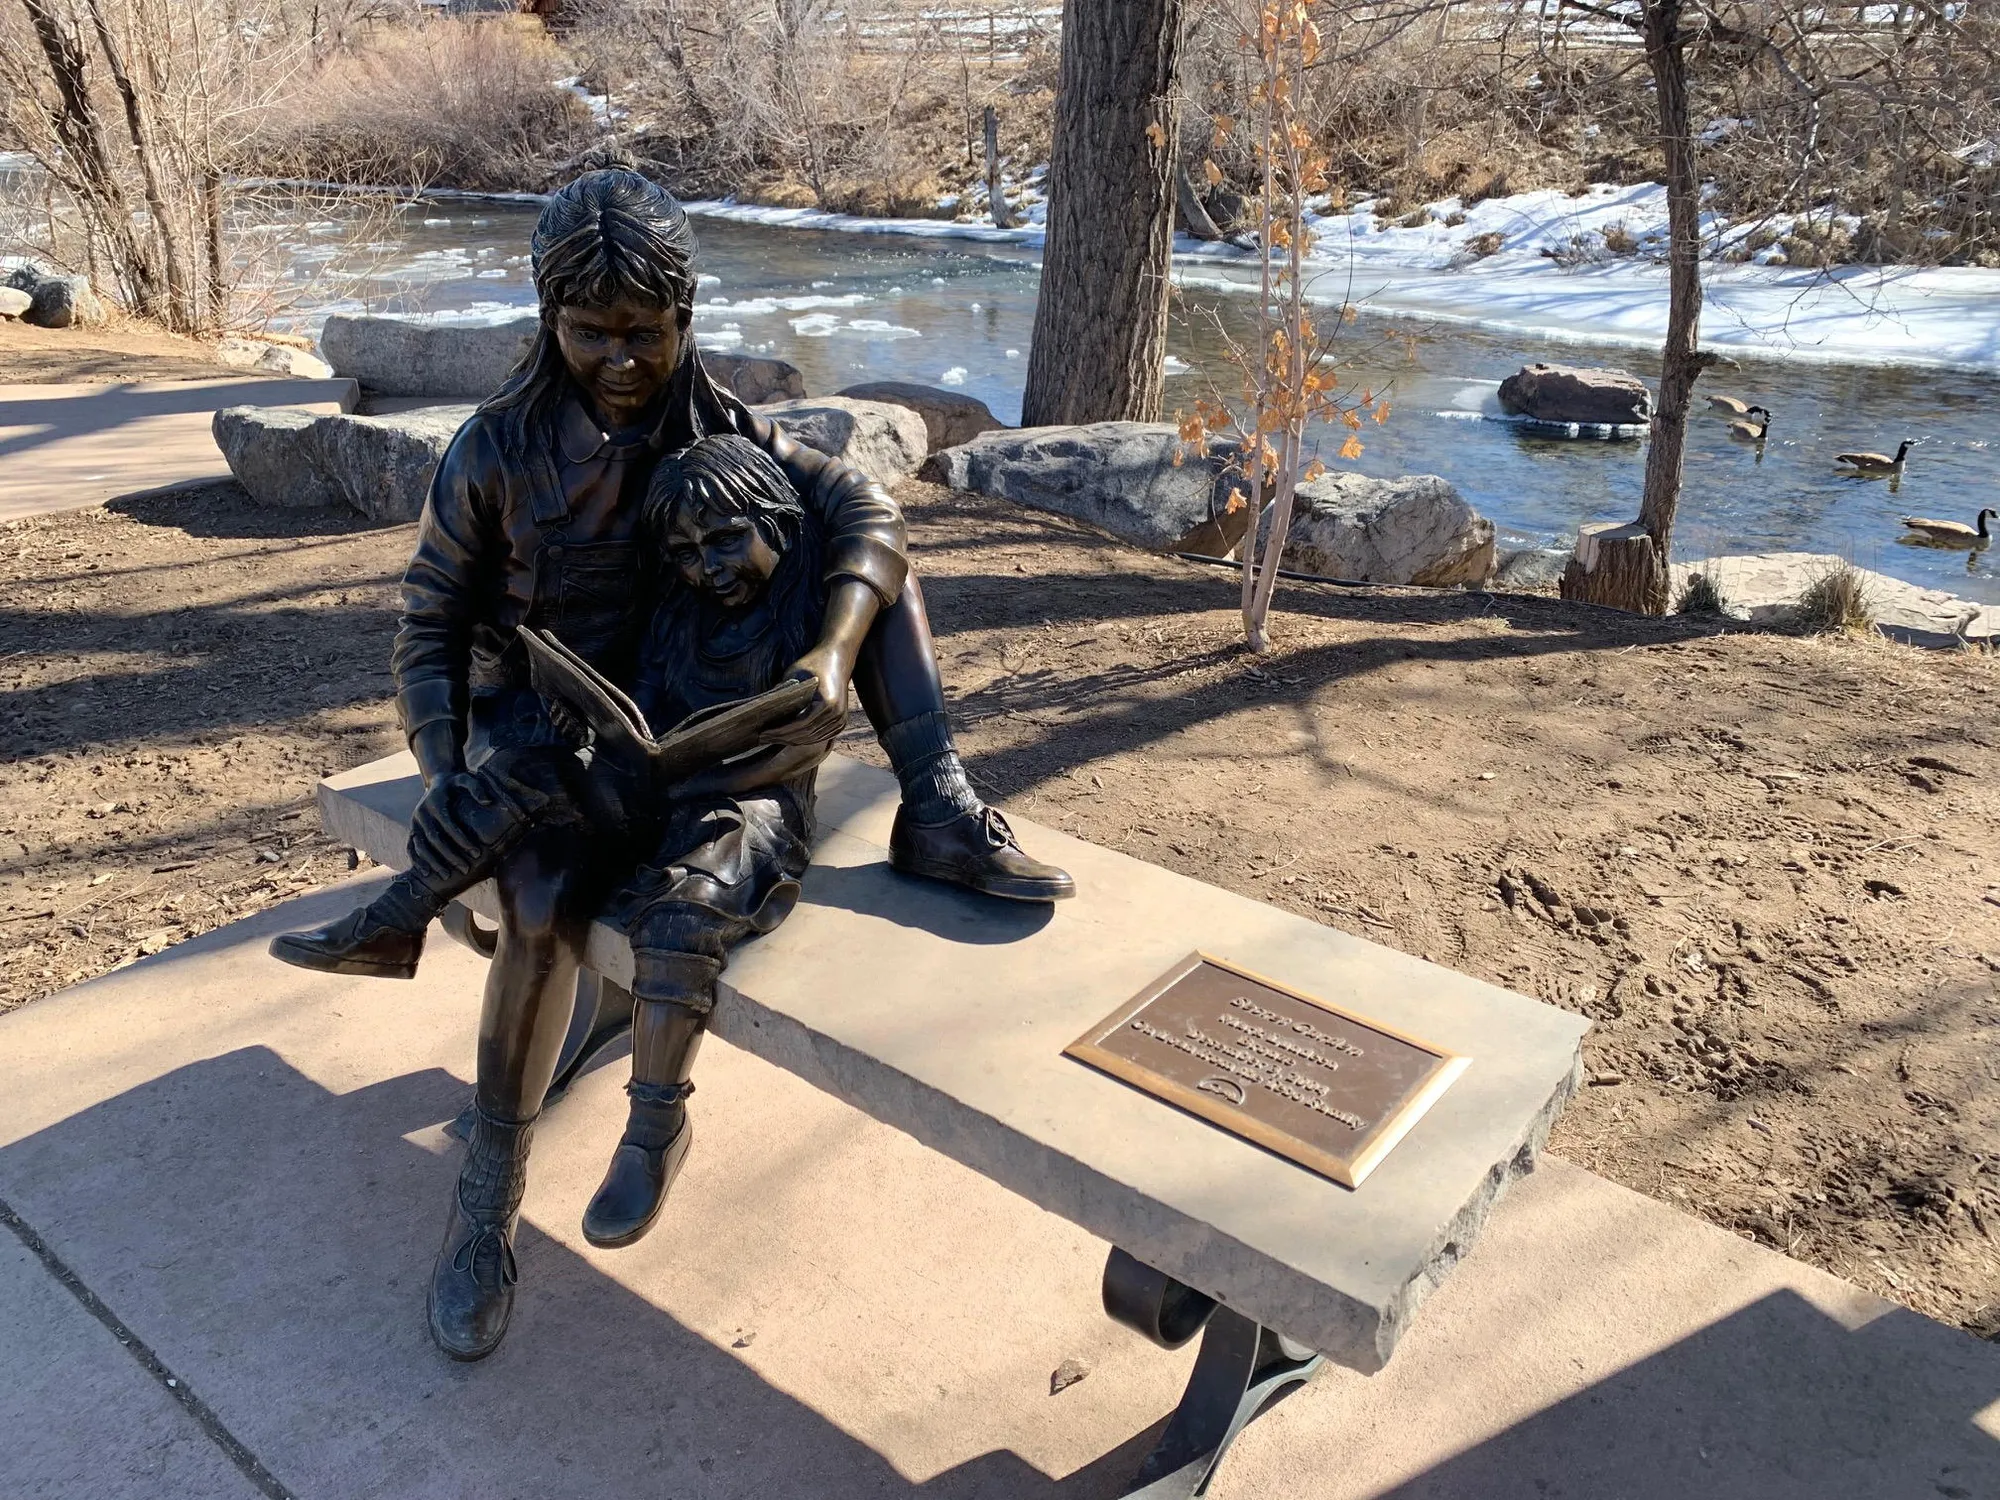 Bronze statue of children reading between the Golden Library & Clear Creek.  Geese in Creek, ice along edge, & snow on bank.